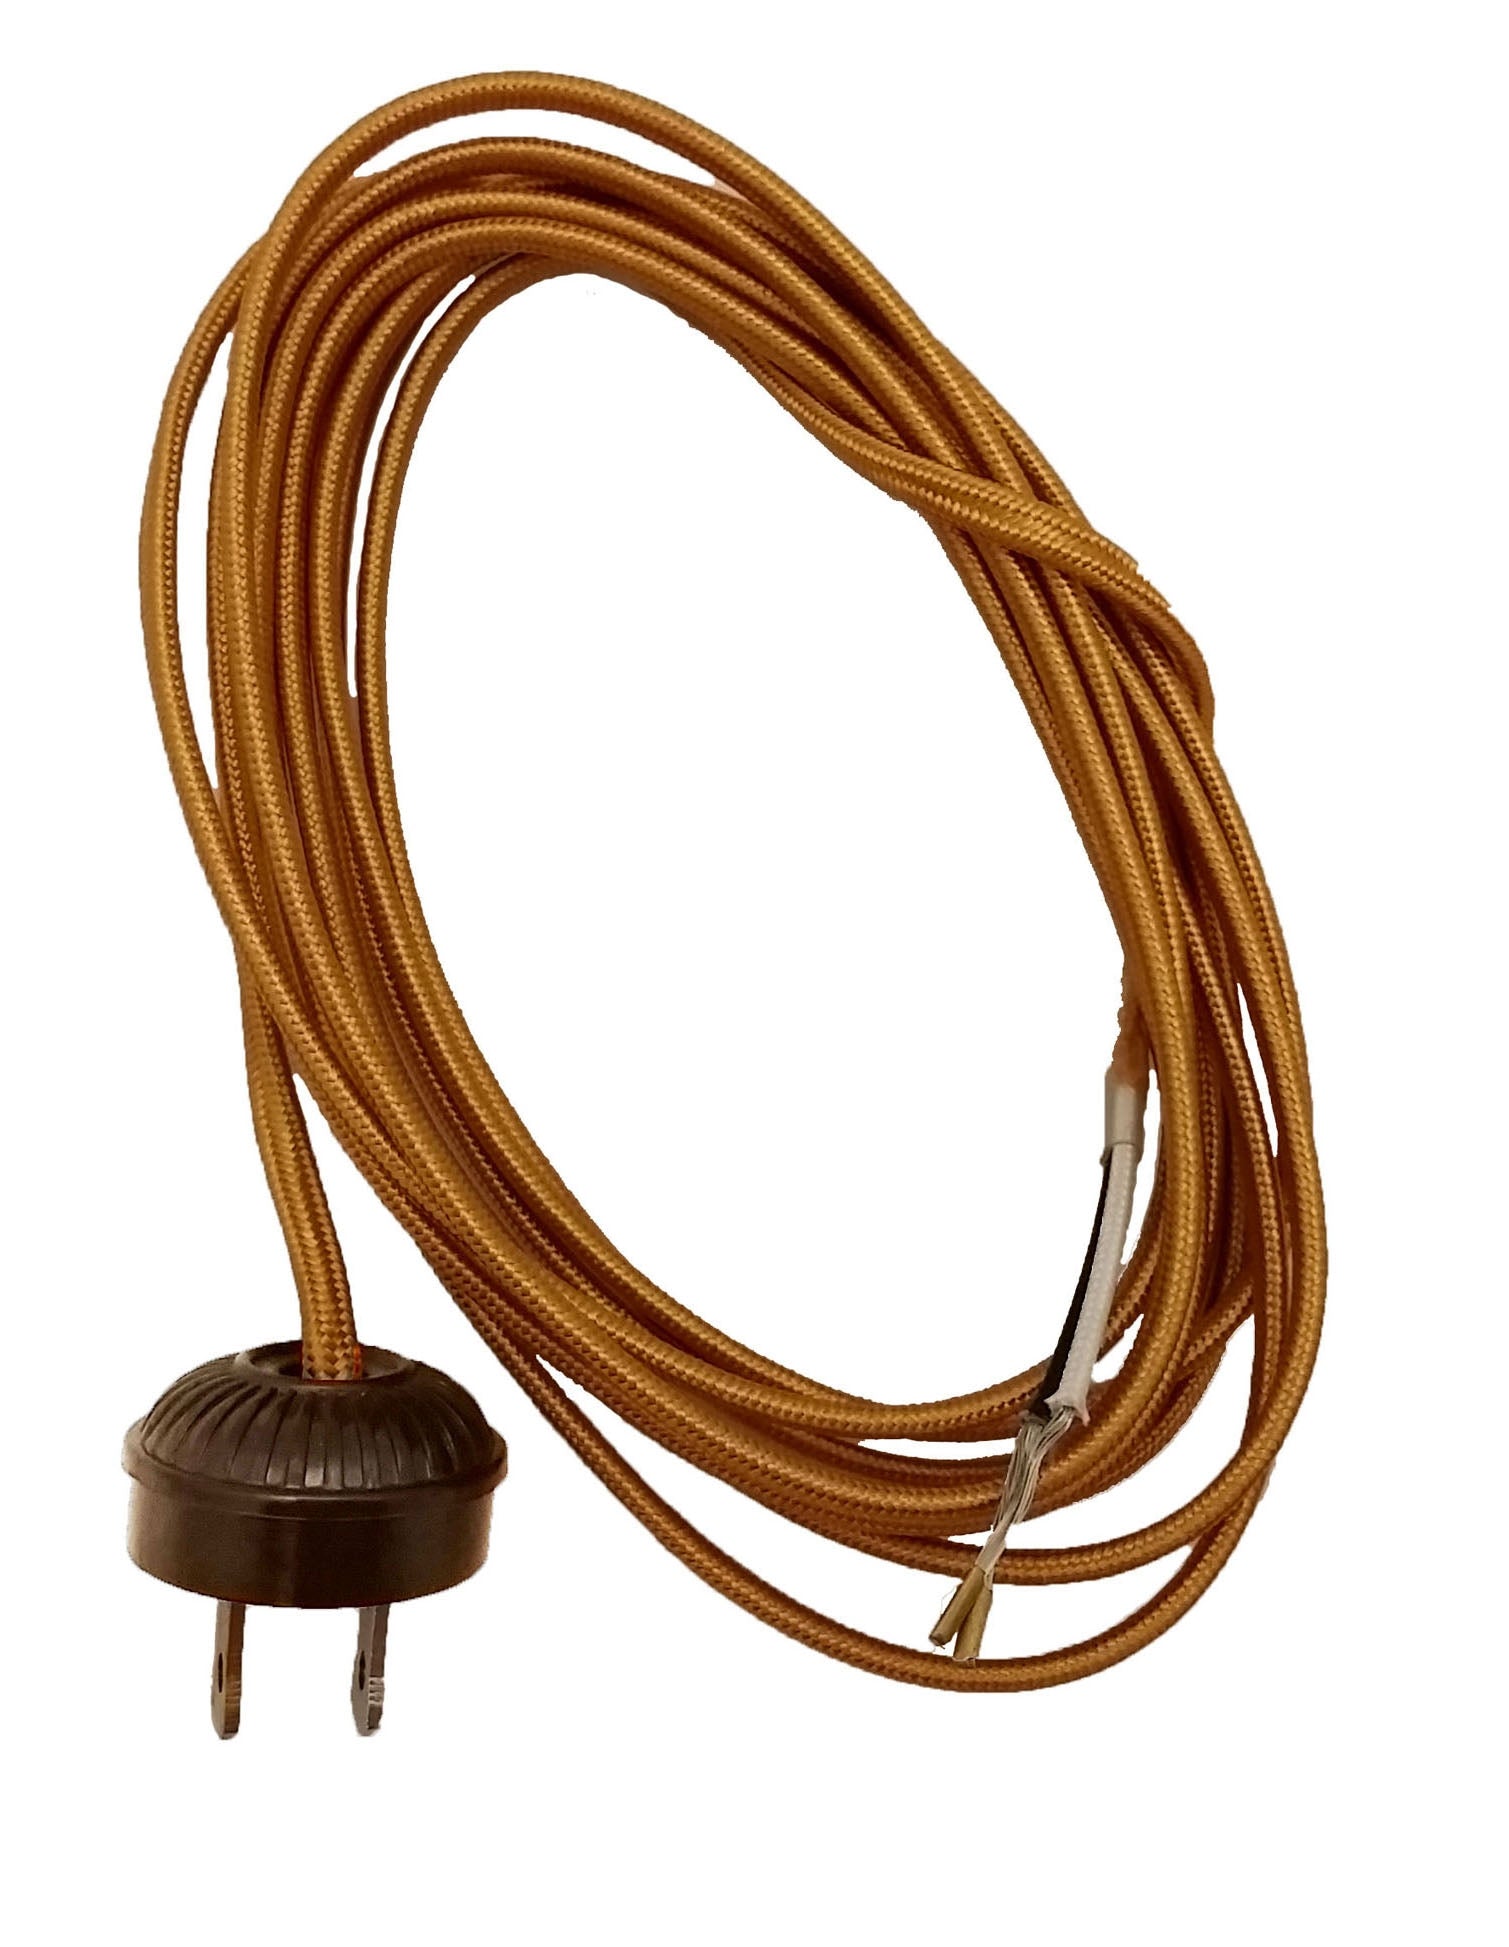 Rayon Lamp Cord - Wire Set with Antique Style Plug, CHOICE OF 2 COLORS AND 2 STYLES